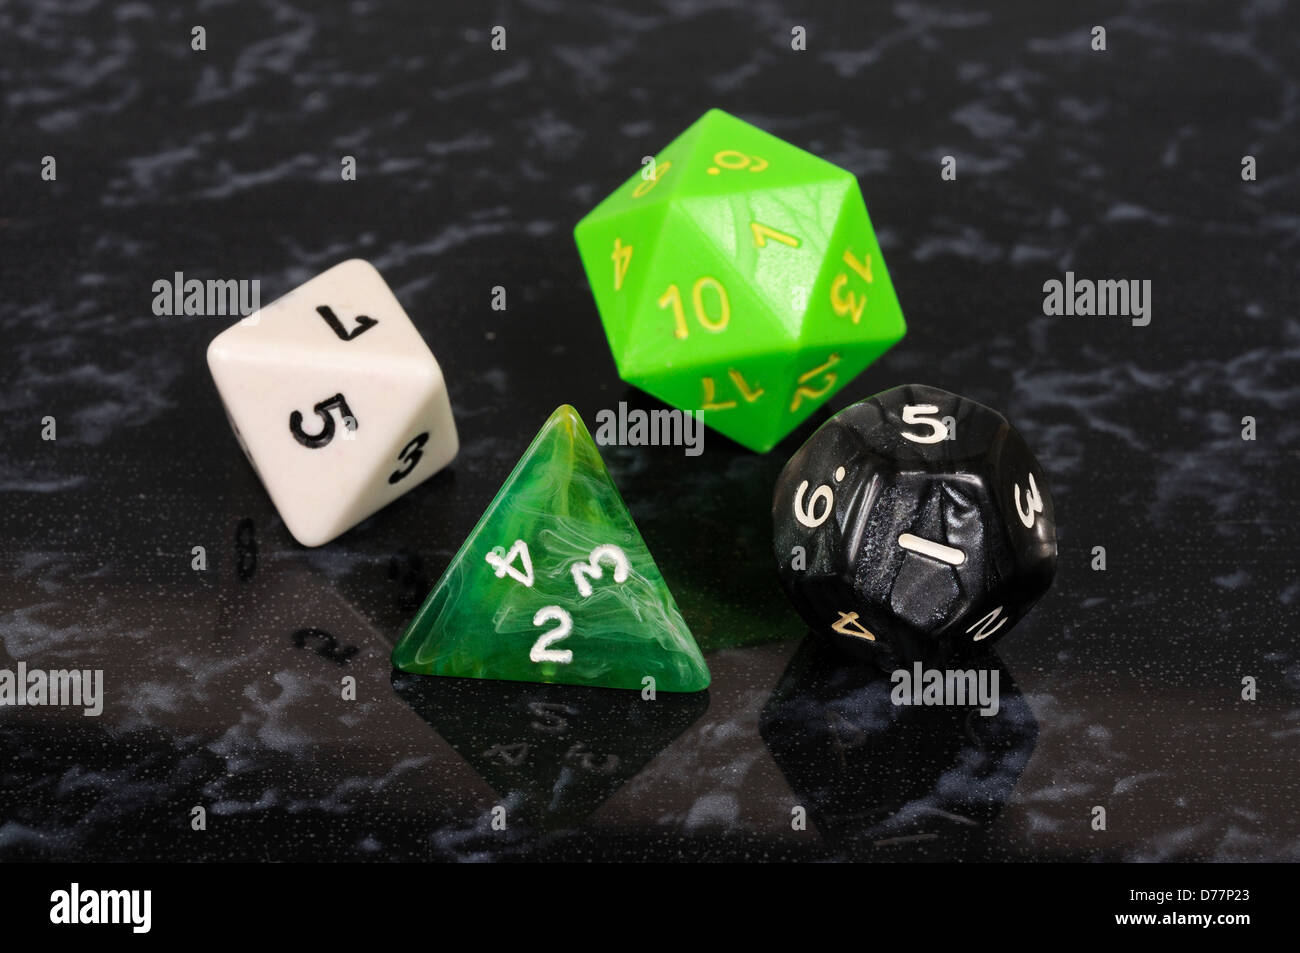 Platonic dice selection against a black background. Stock Photo